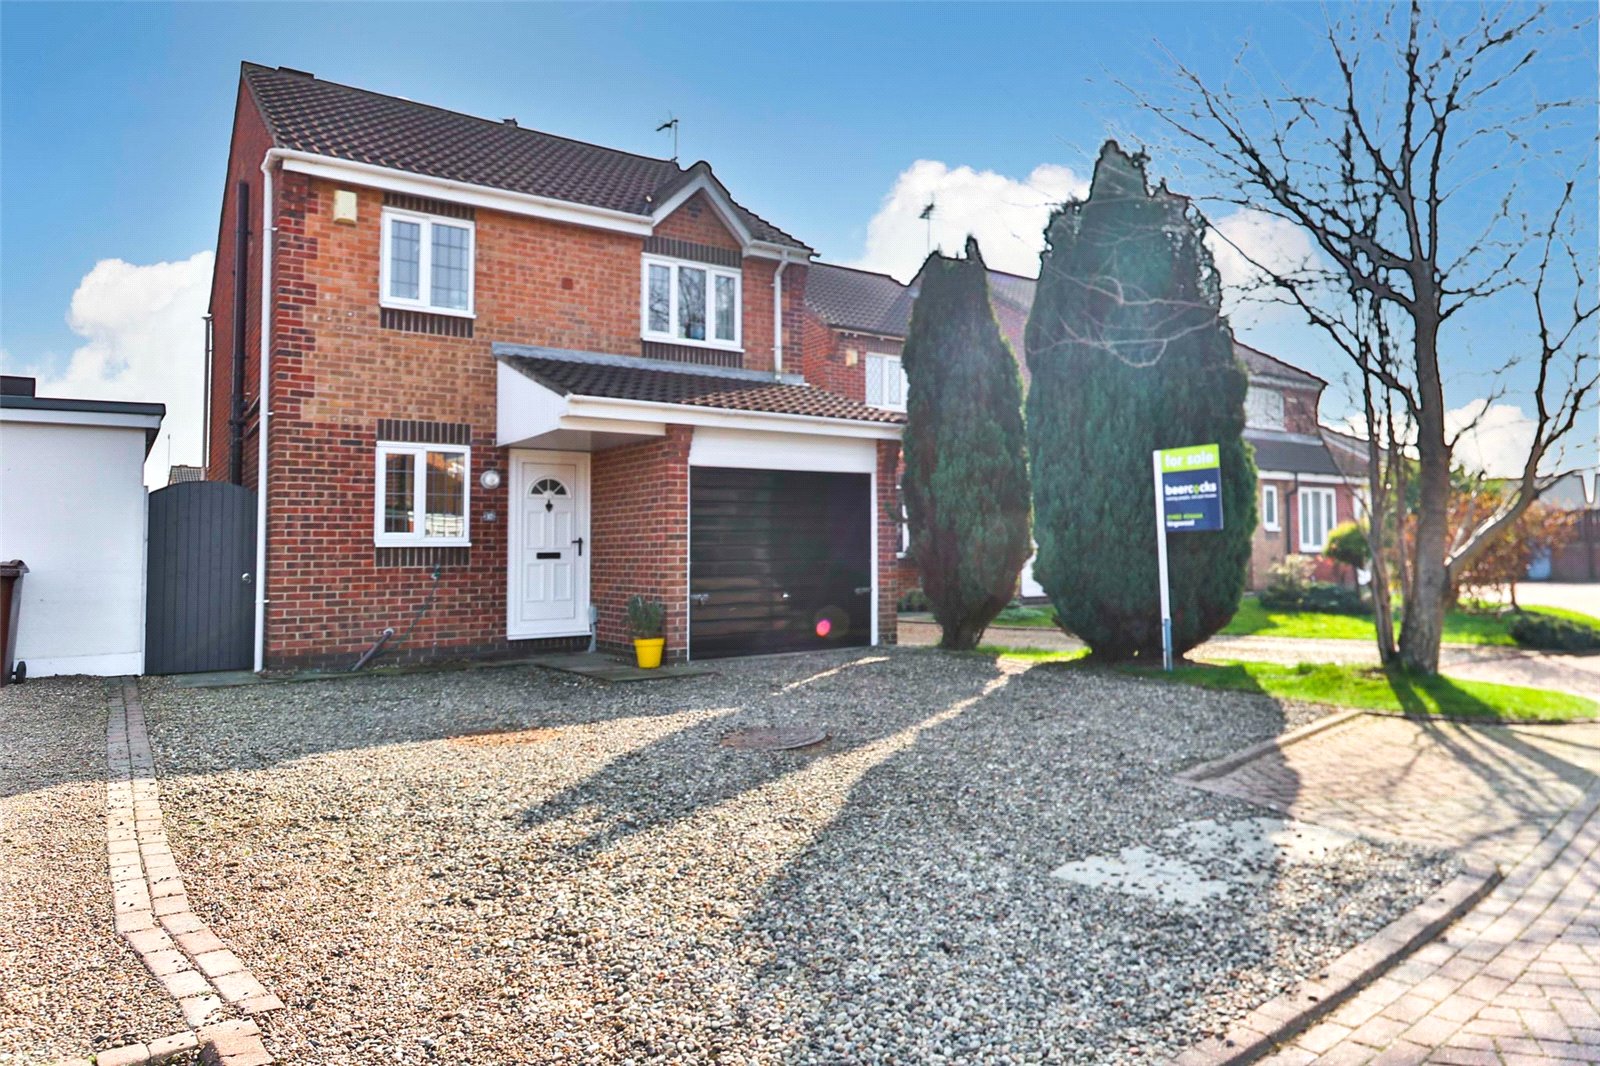 3 bed house for sale in Rainswood Close, Kingswood - Property Image 1